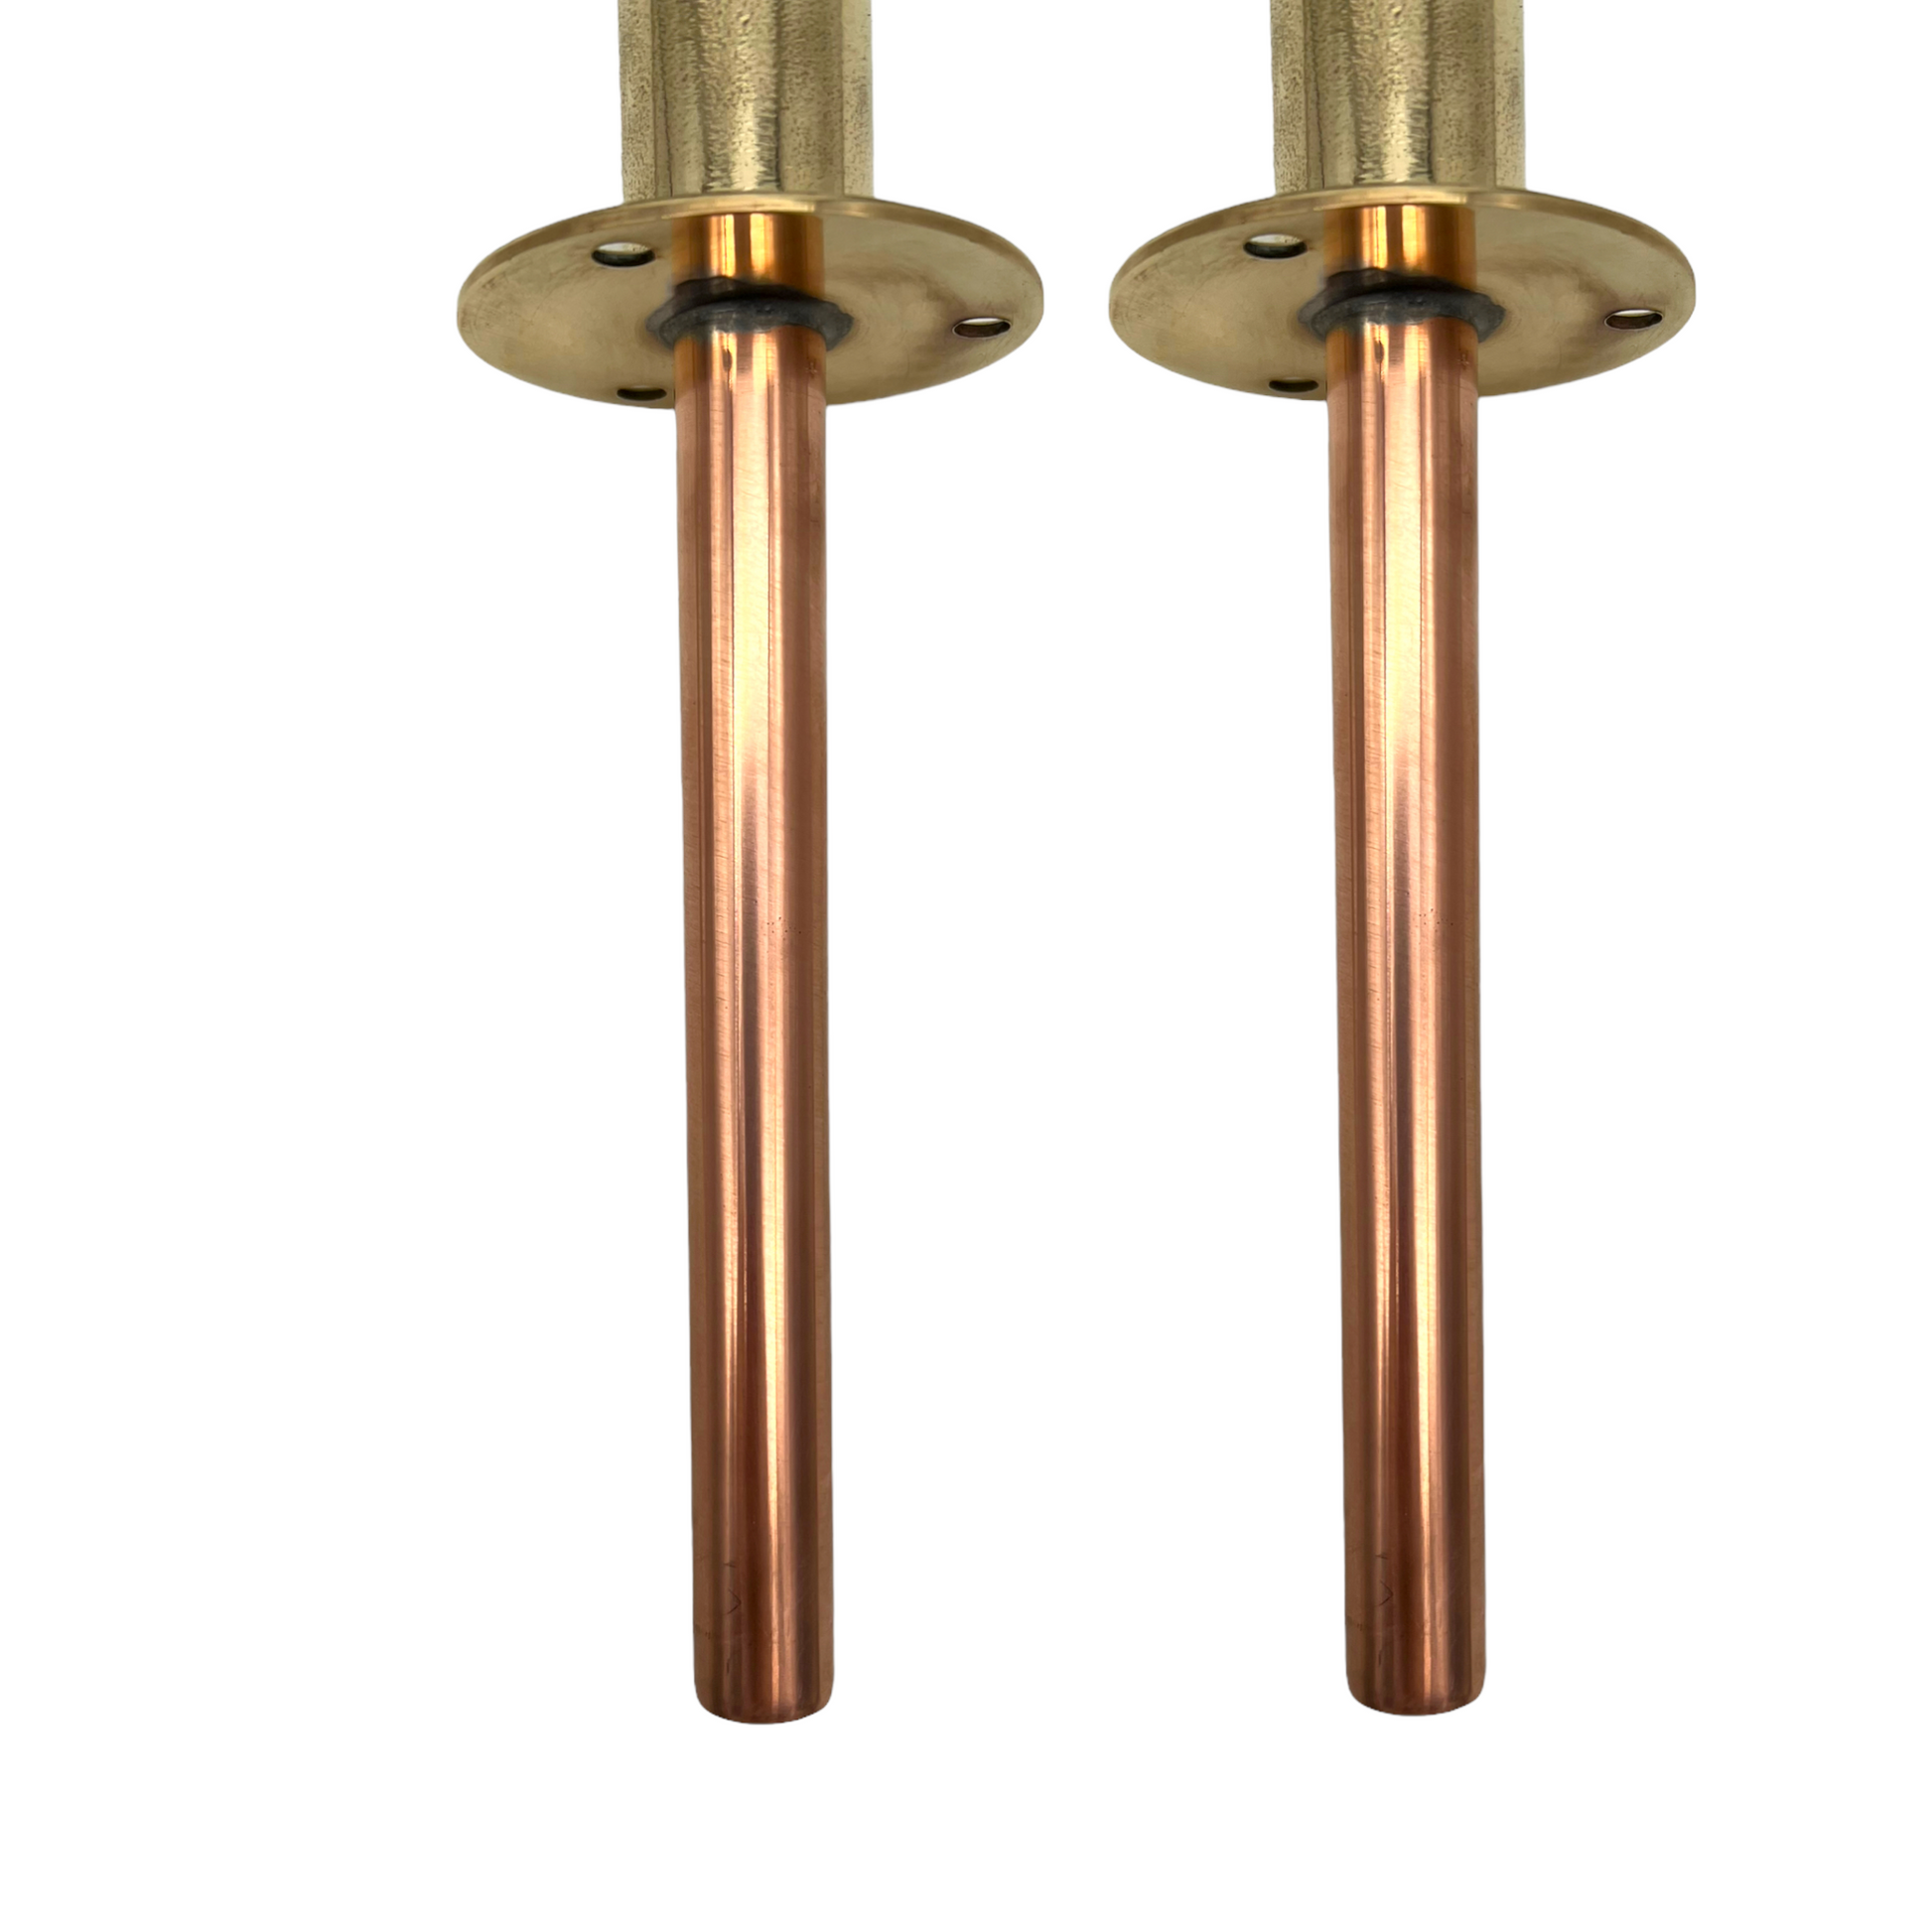 Section under tap when fitted of copper and brass handmade taps sold by All Things French Store